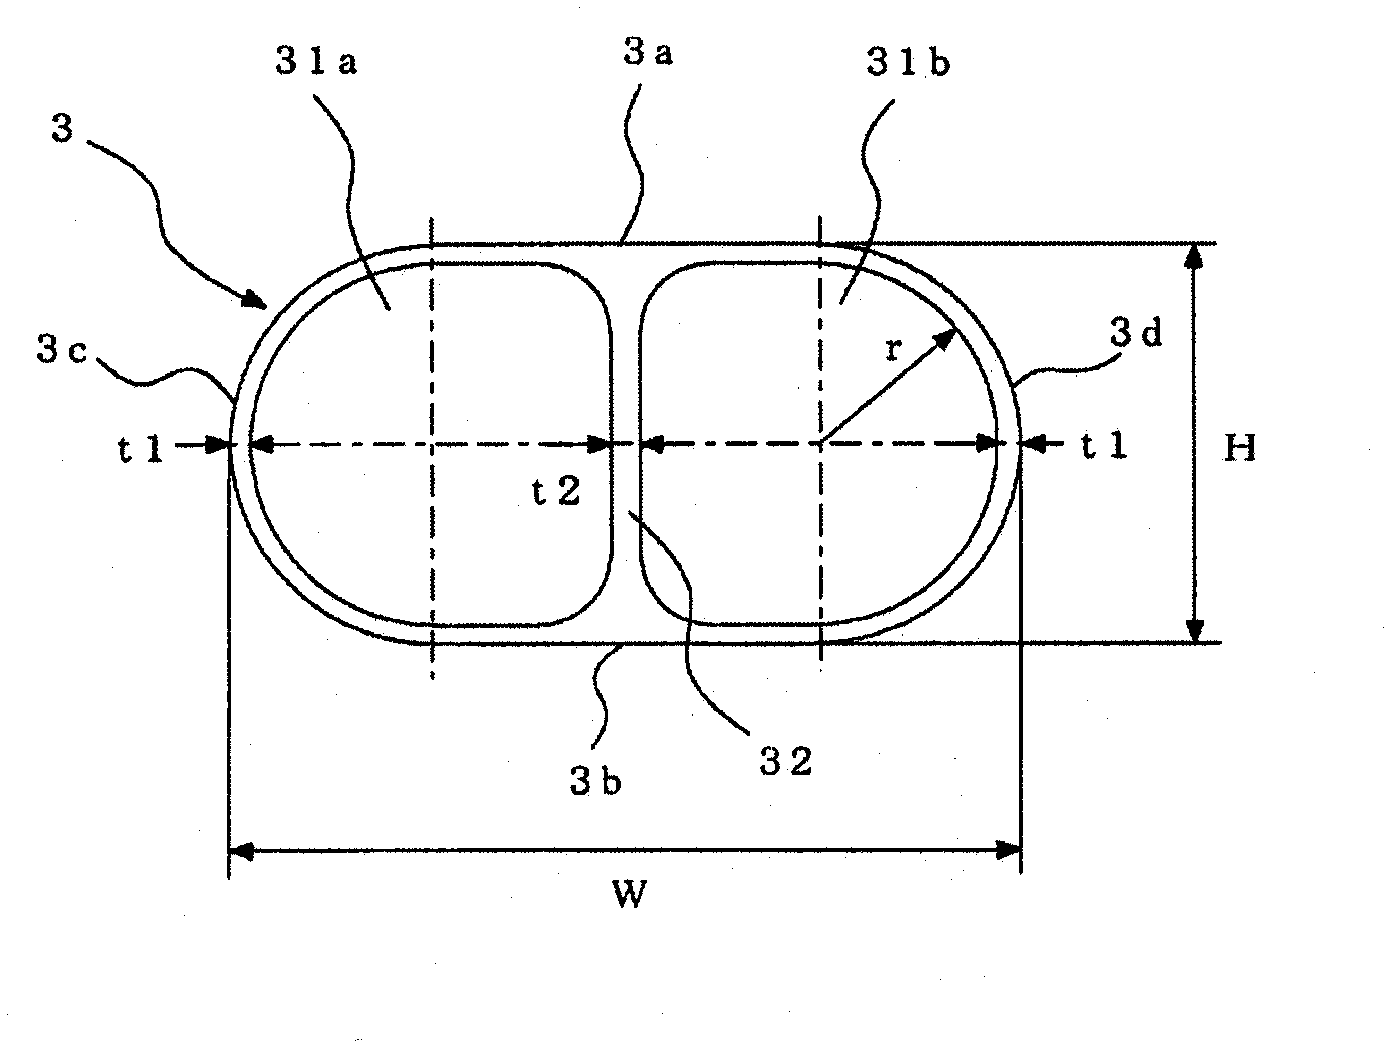 Heat exchanger and air conditioner having the heat exchanger